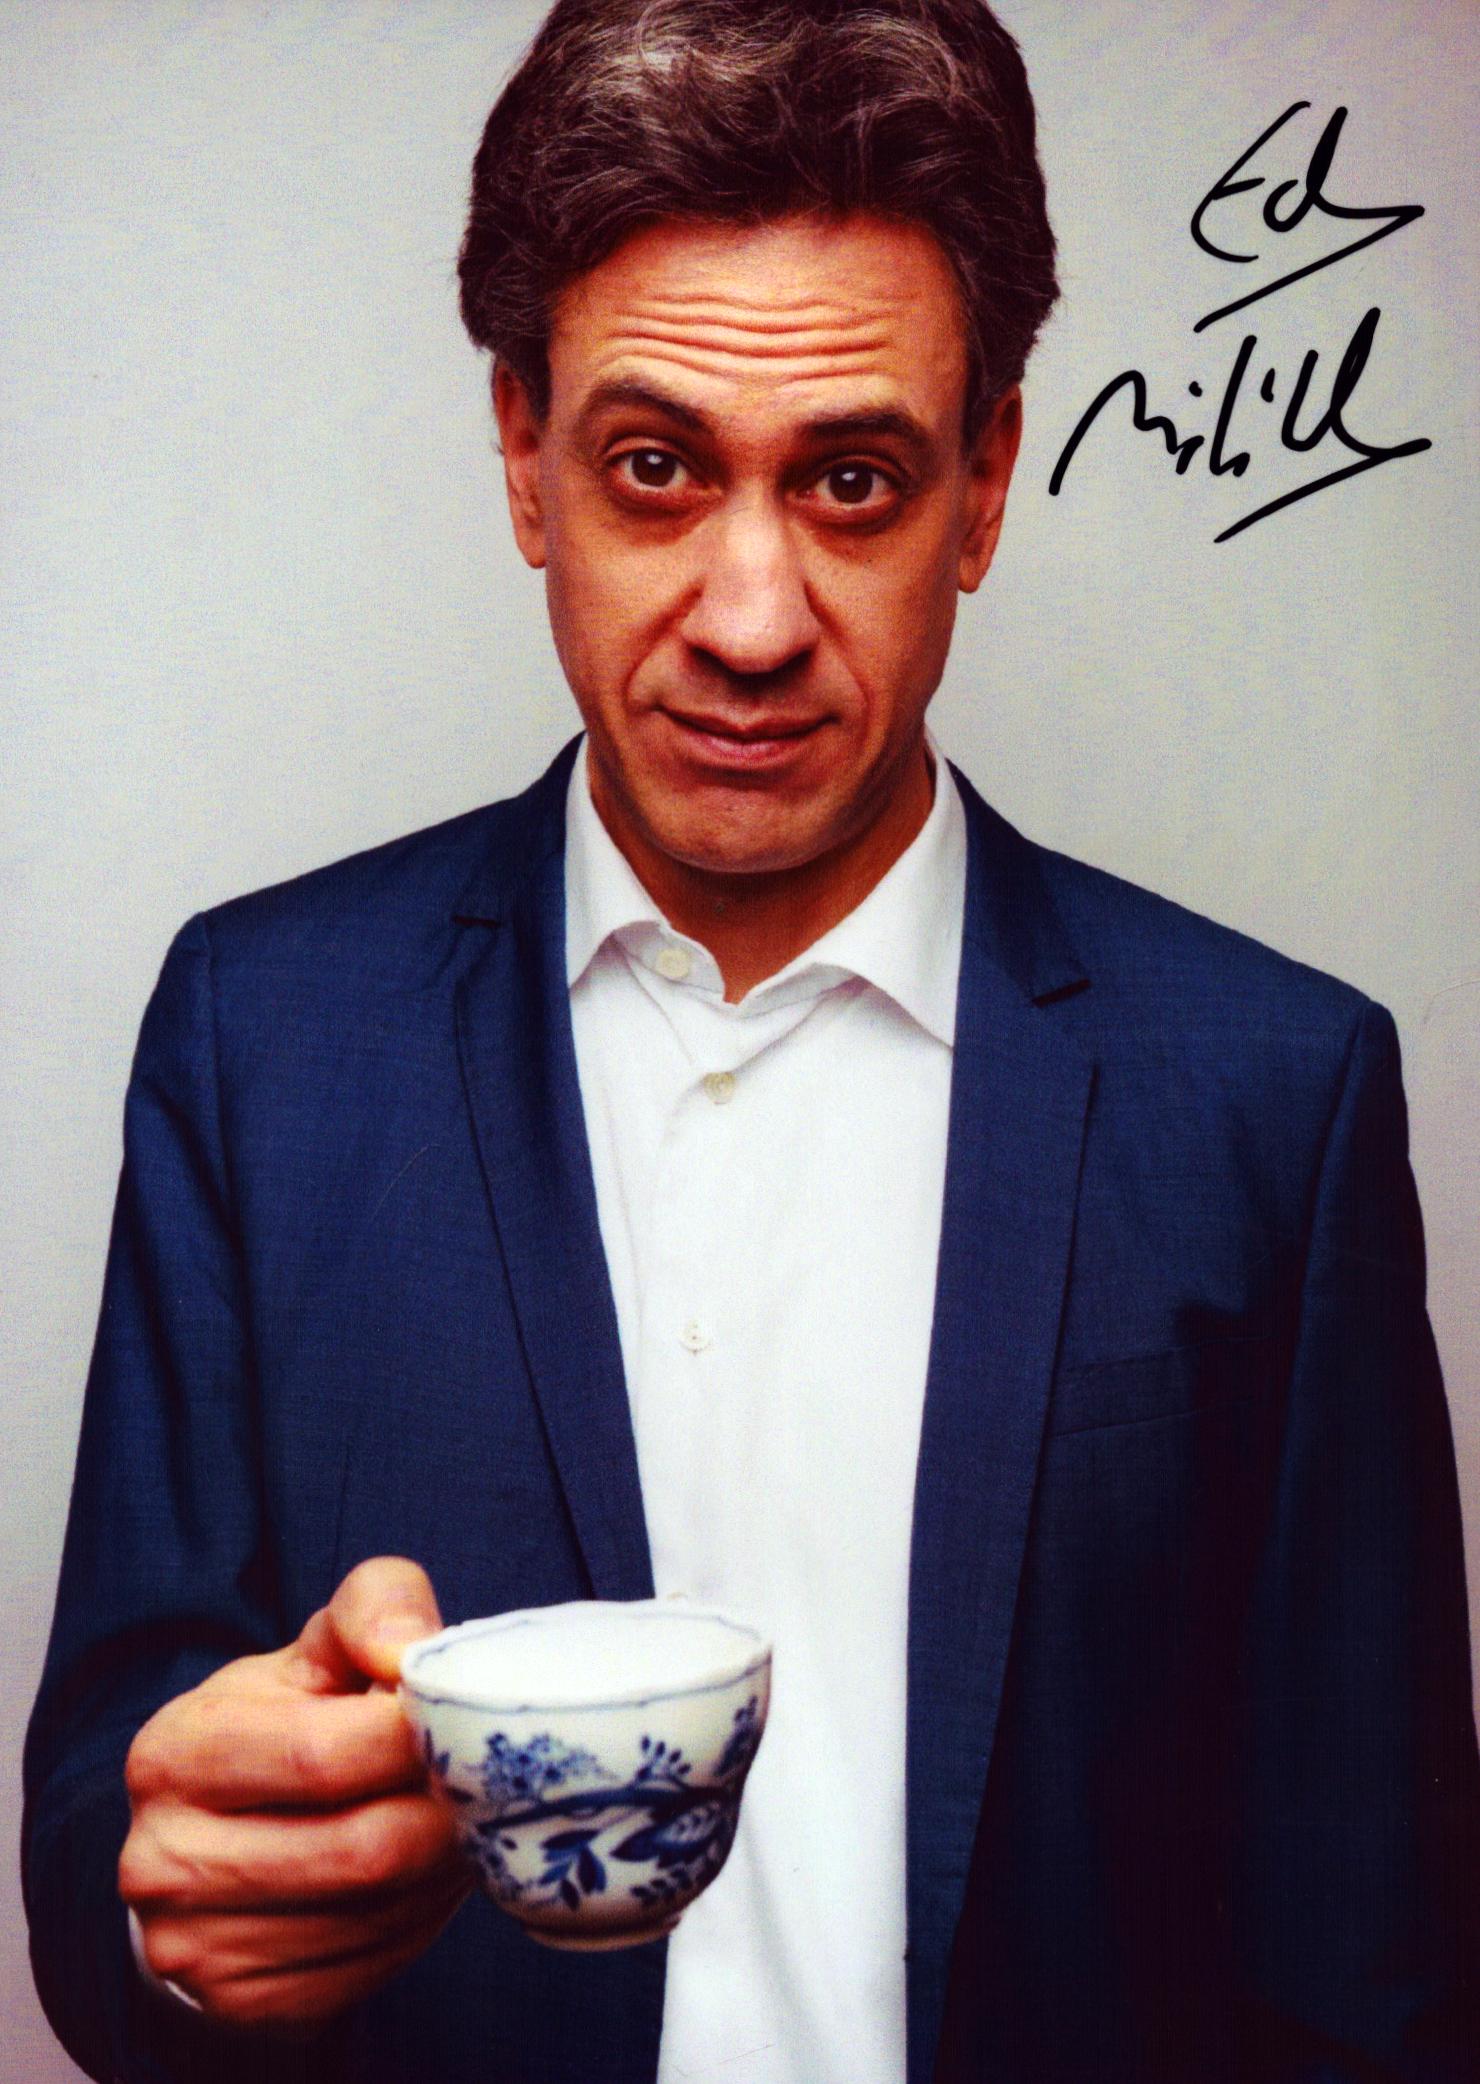 Ed Miliband Signed photo. Measures 5 inch by 7inch appx. Good Condition. All autographs come with